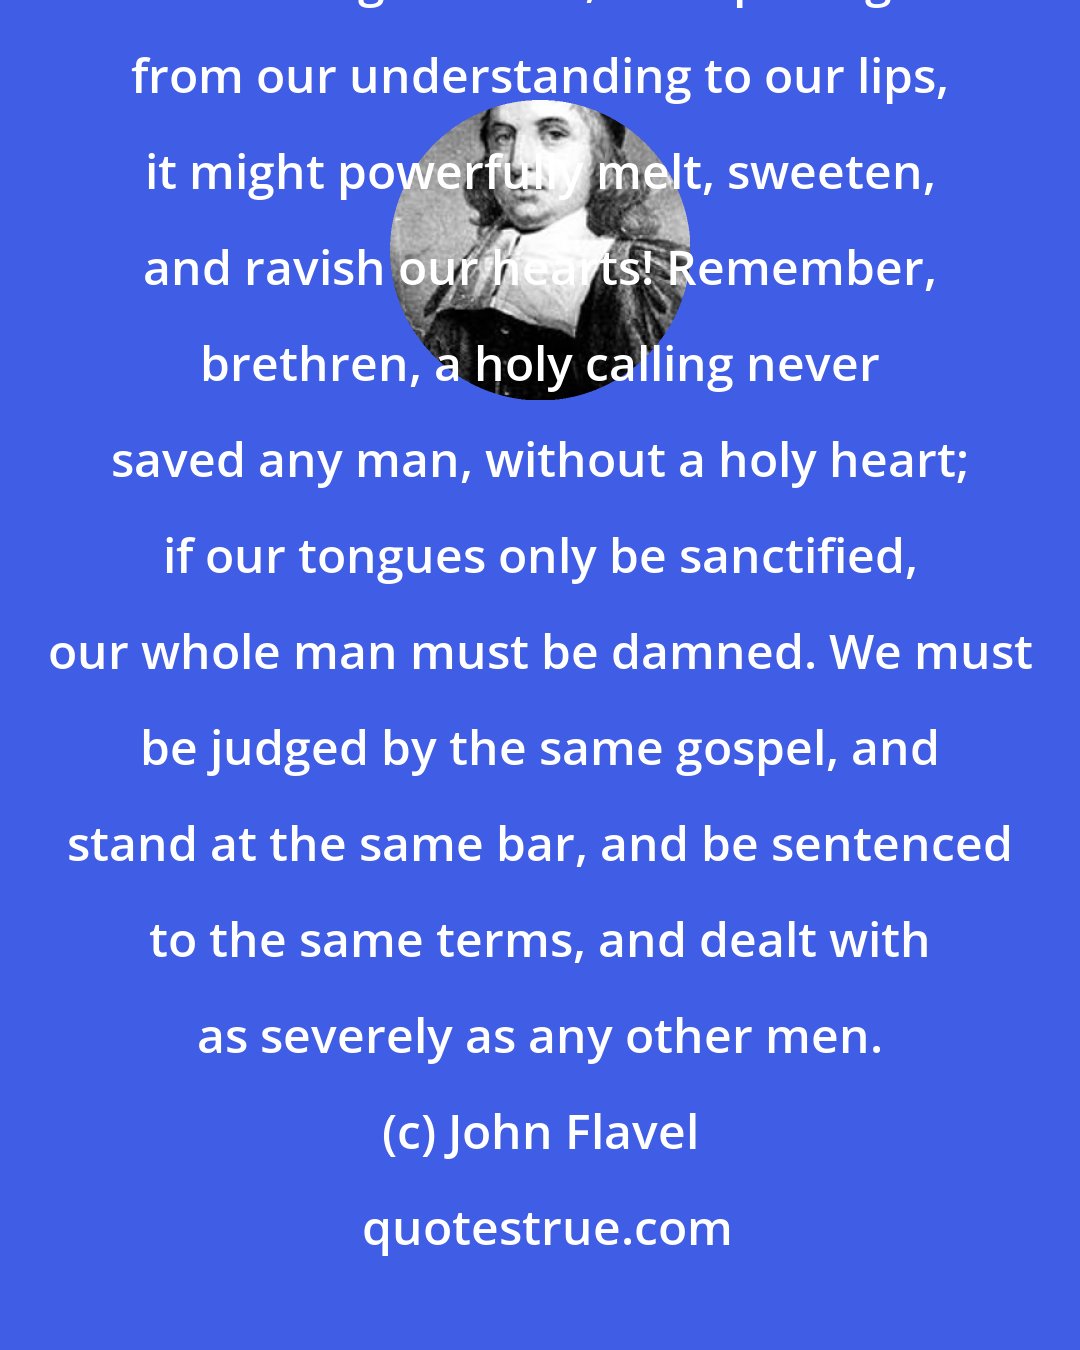 John Flavel: Let us see that our knowledge of Christ be not a powerless, barren, unpractical knowledge: O that, in its passage from our understanding to our lips, it might powerfully melt, sweeten, and ravish our hearts! Remember, brethren, a holy calling never saved any man, without a holy heart; if our tongues only be sanctified, our whole man must be damned. We must be judged by the same gospel, and stand at the same bar, and be sentenced to the same terms, and dealt with as severely as any other men.